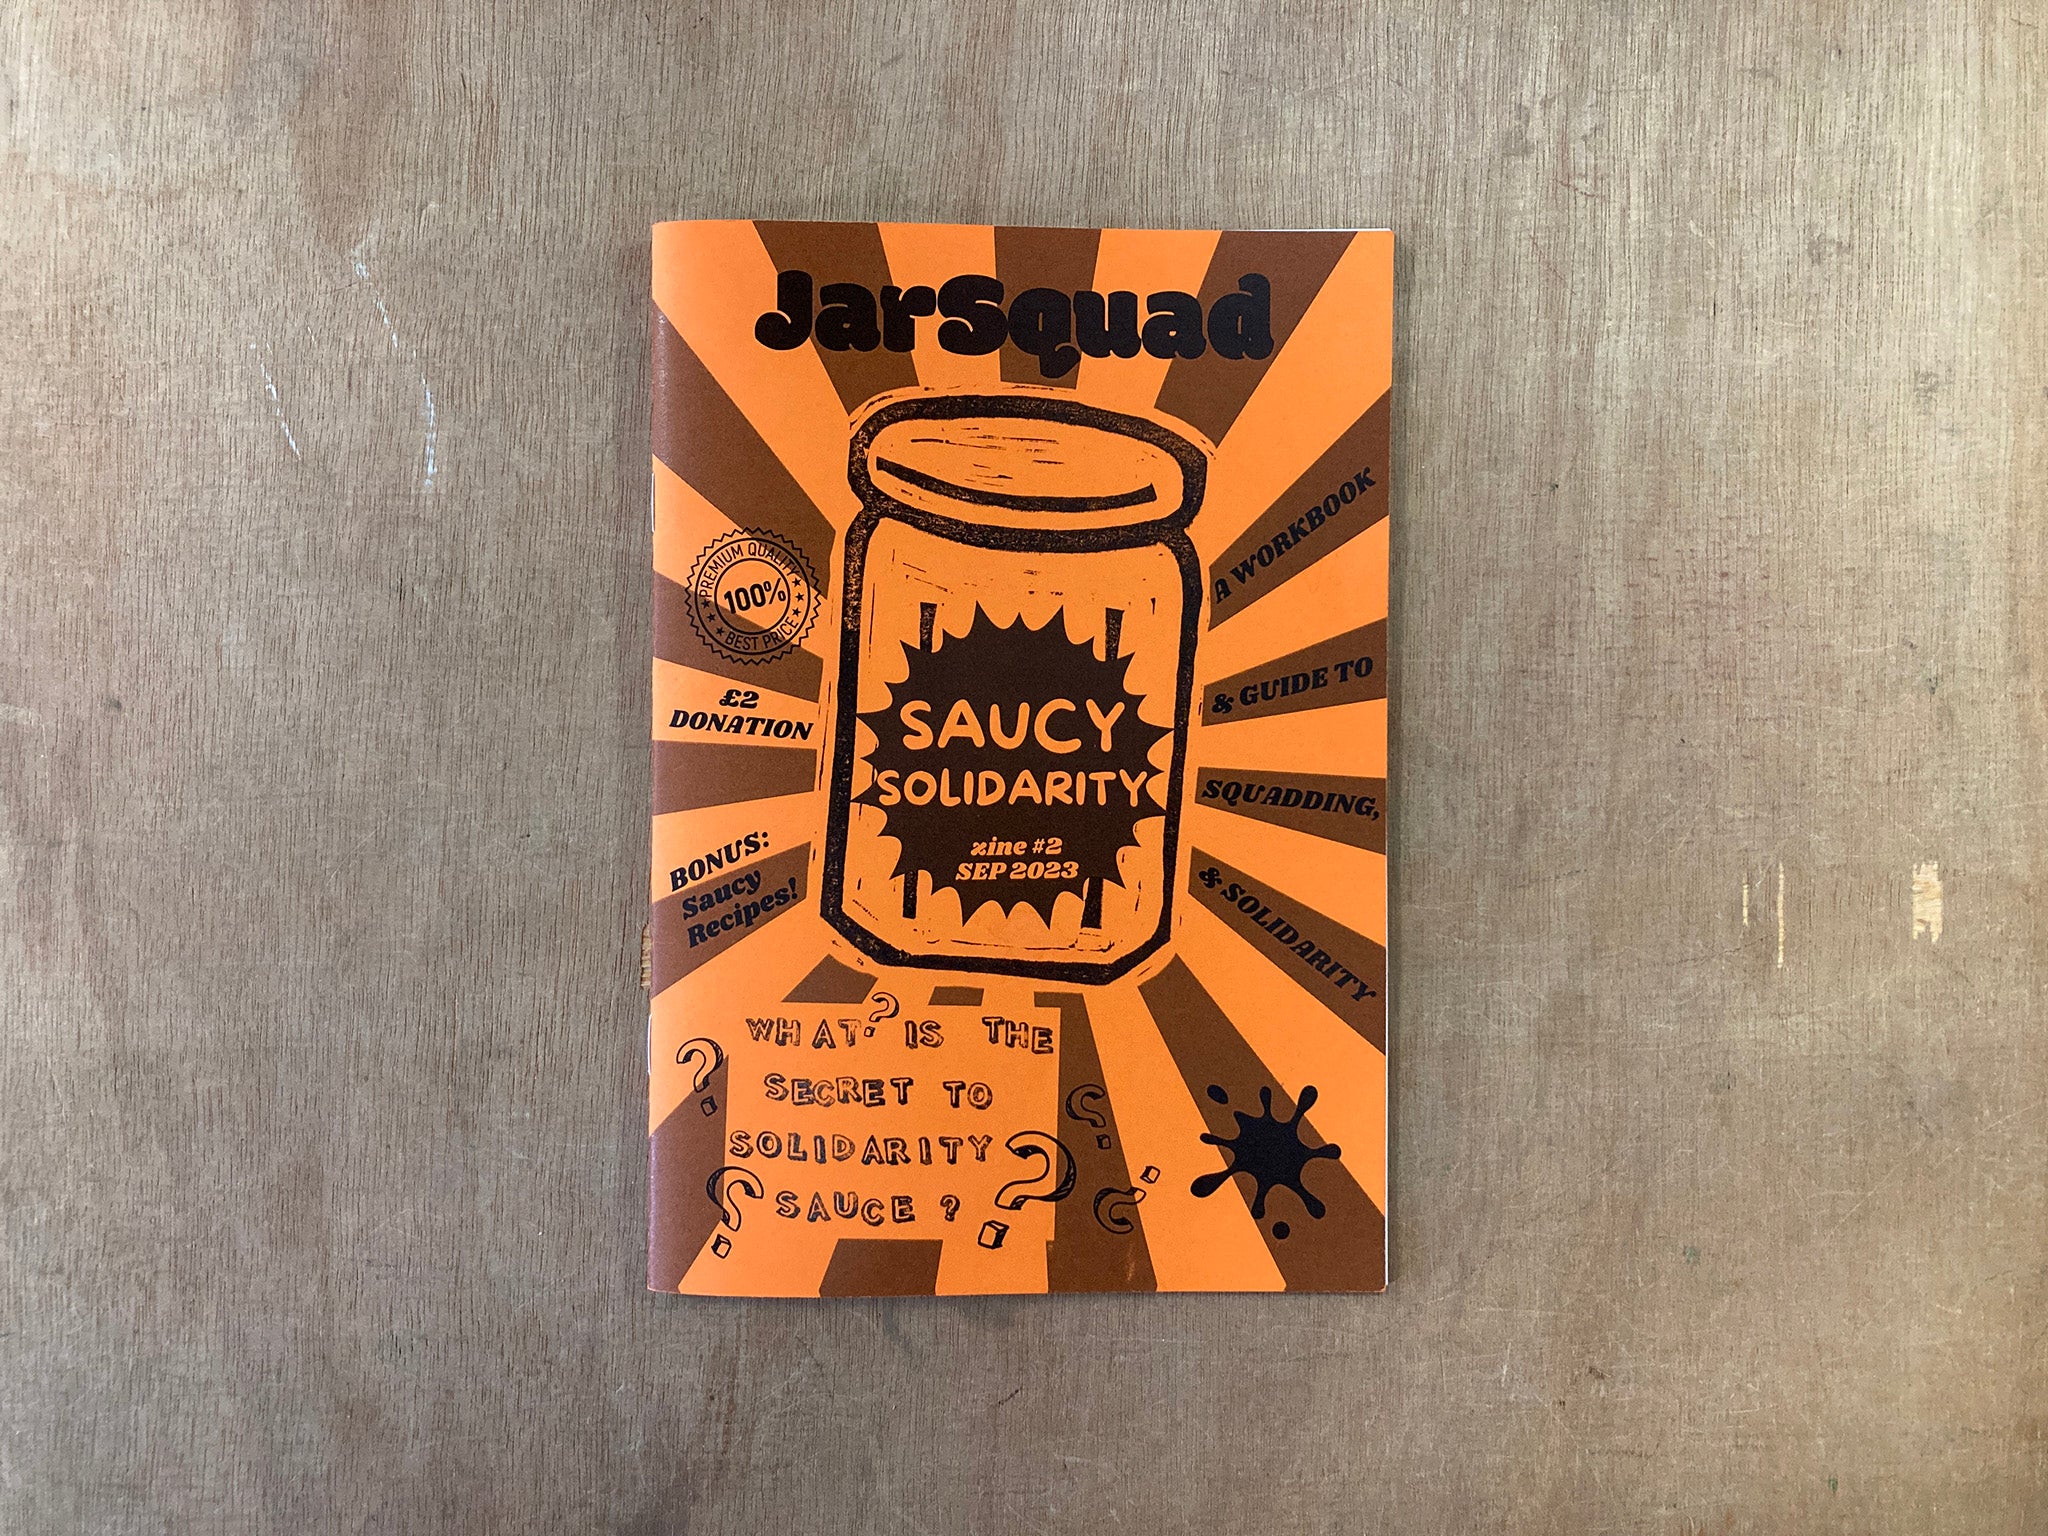 SAUCY SOLIDARITY by JarSquad